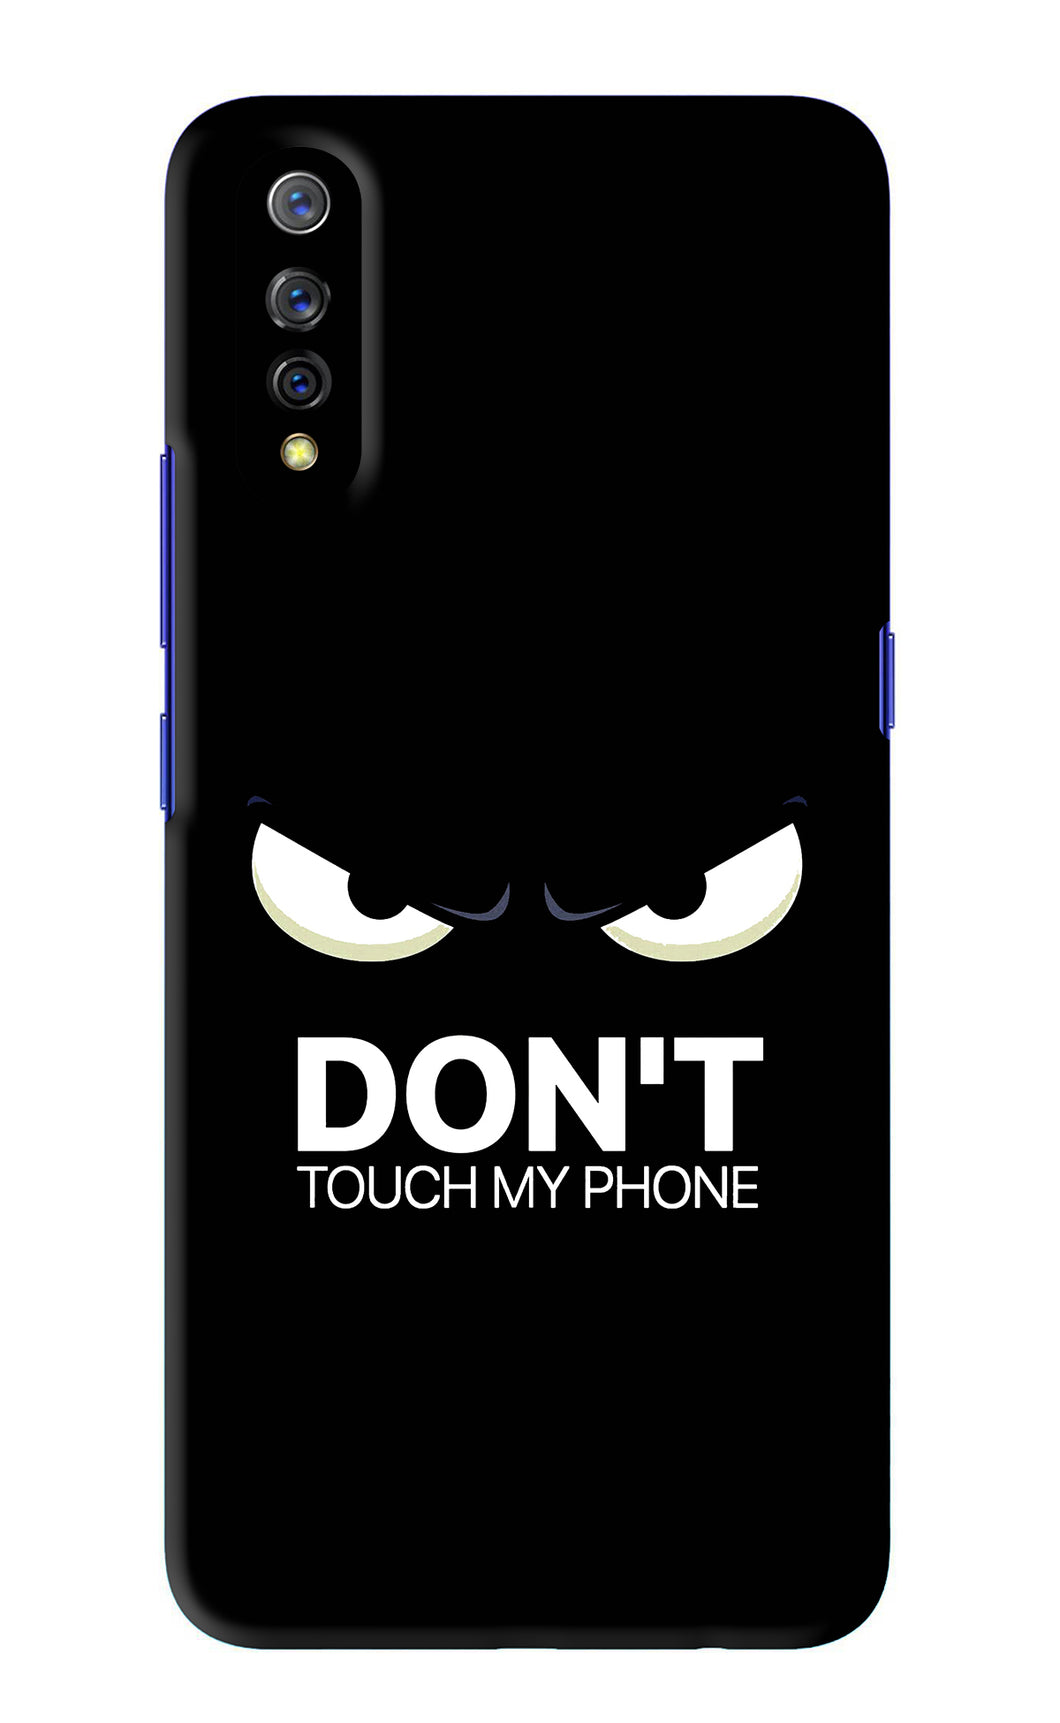 Don'T Touch My Phone Vivo S1 Back Skin Wrap